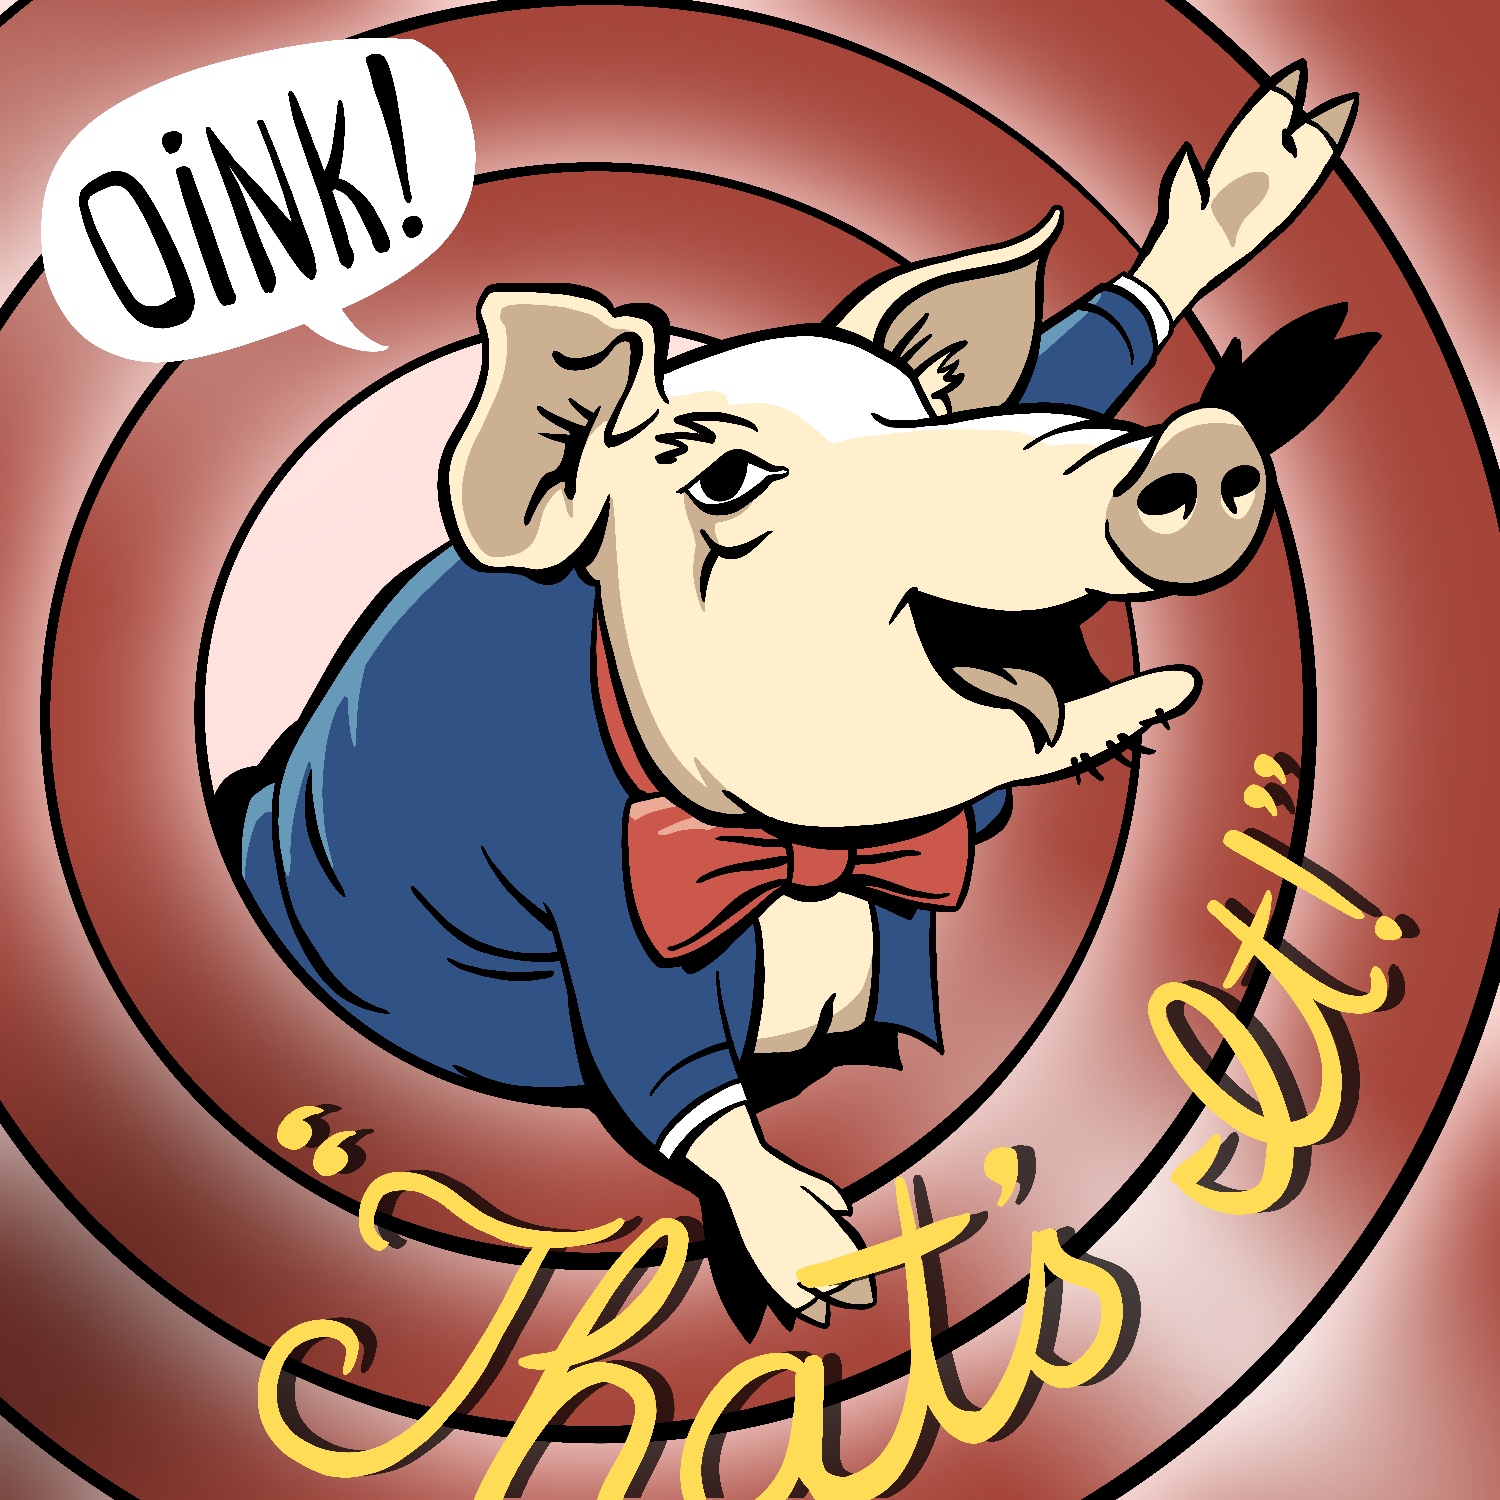 A cartoon illustration of a realistic pig, wearing a bowtie and suit jacket, leaning out of a set of circular color rings and smiling at the viewer, with one hoof up in the air. The pig has a light complexion and its tongue hanging out. The bowtie is red, and the suit jacket is a dark blue. The color rings are red. There is a small word bubble coming off from the pig to the upper left, with the word "oink!" inside. The words "That's It!" are written in yellow, in cursive, arcing under the bottom right half of the image. It is meant to parody the "That's All, Folks!" outro animations, typically featuring Porky Pig, from Looney Tunes/Merrie Melodies cartoons.